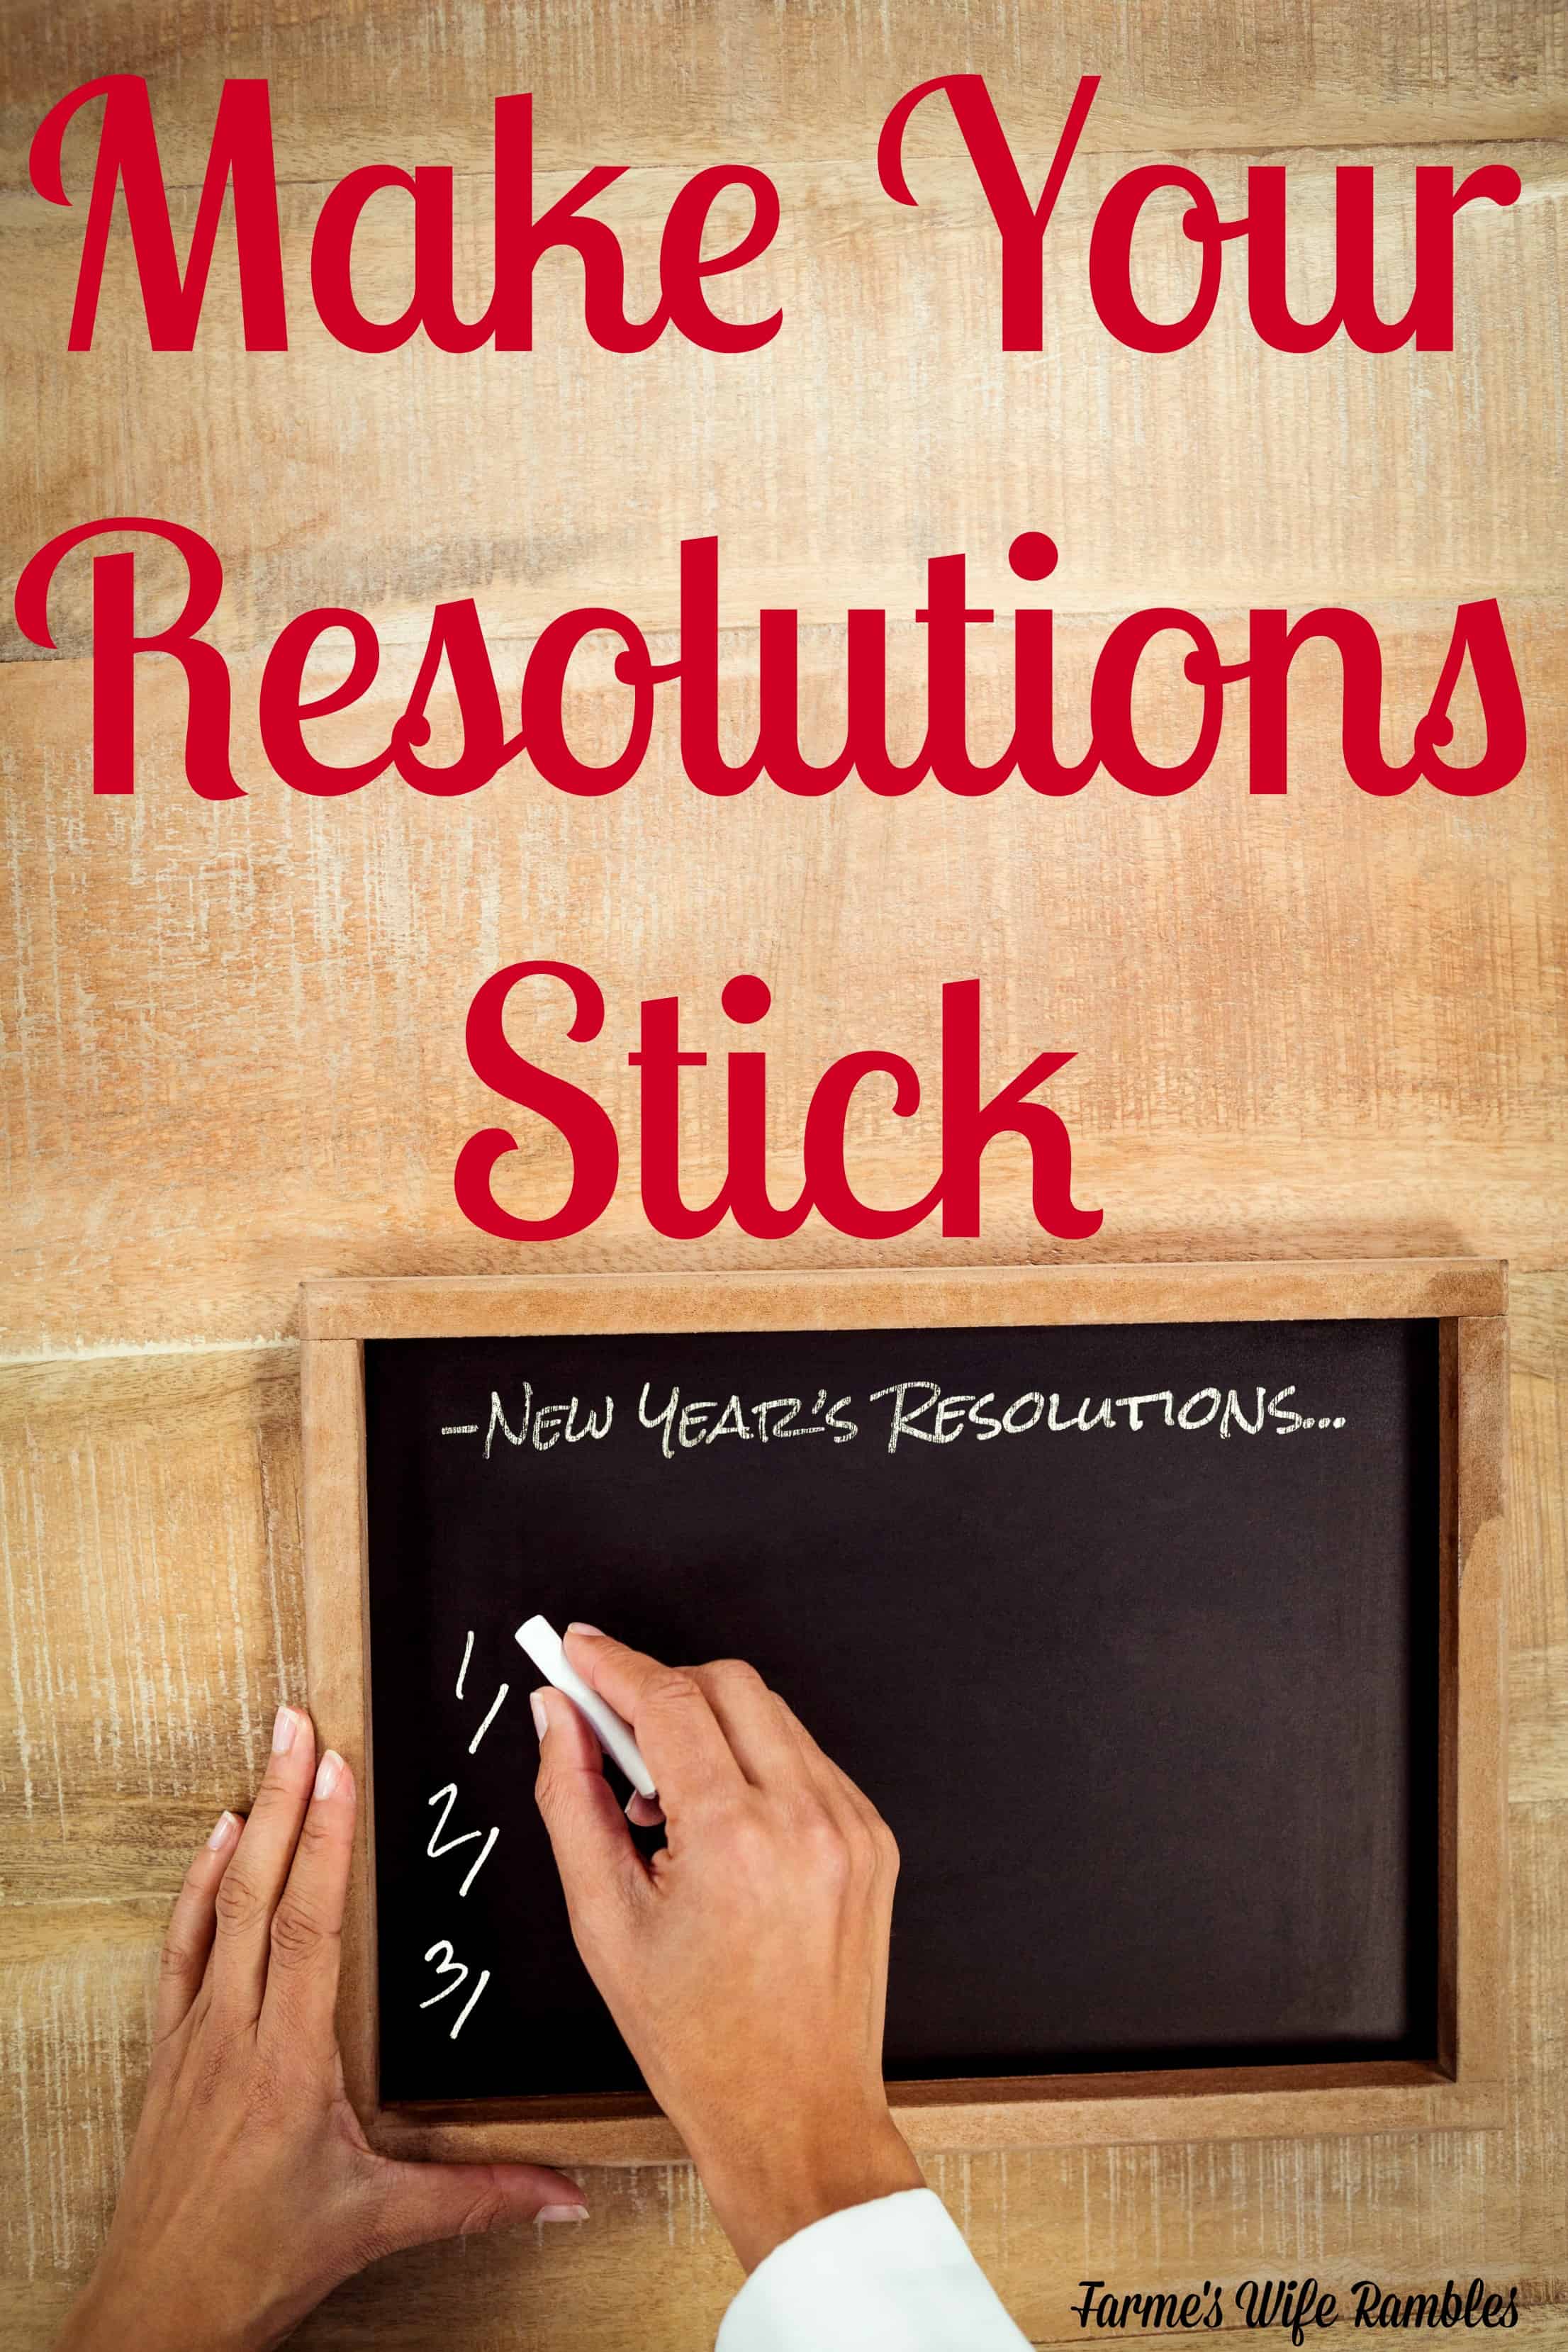 There are some ways you can make a goal for the New Year stick and here are some of my best tips on how to make New Year's Resolutions stick.